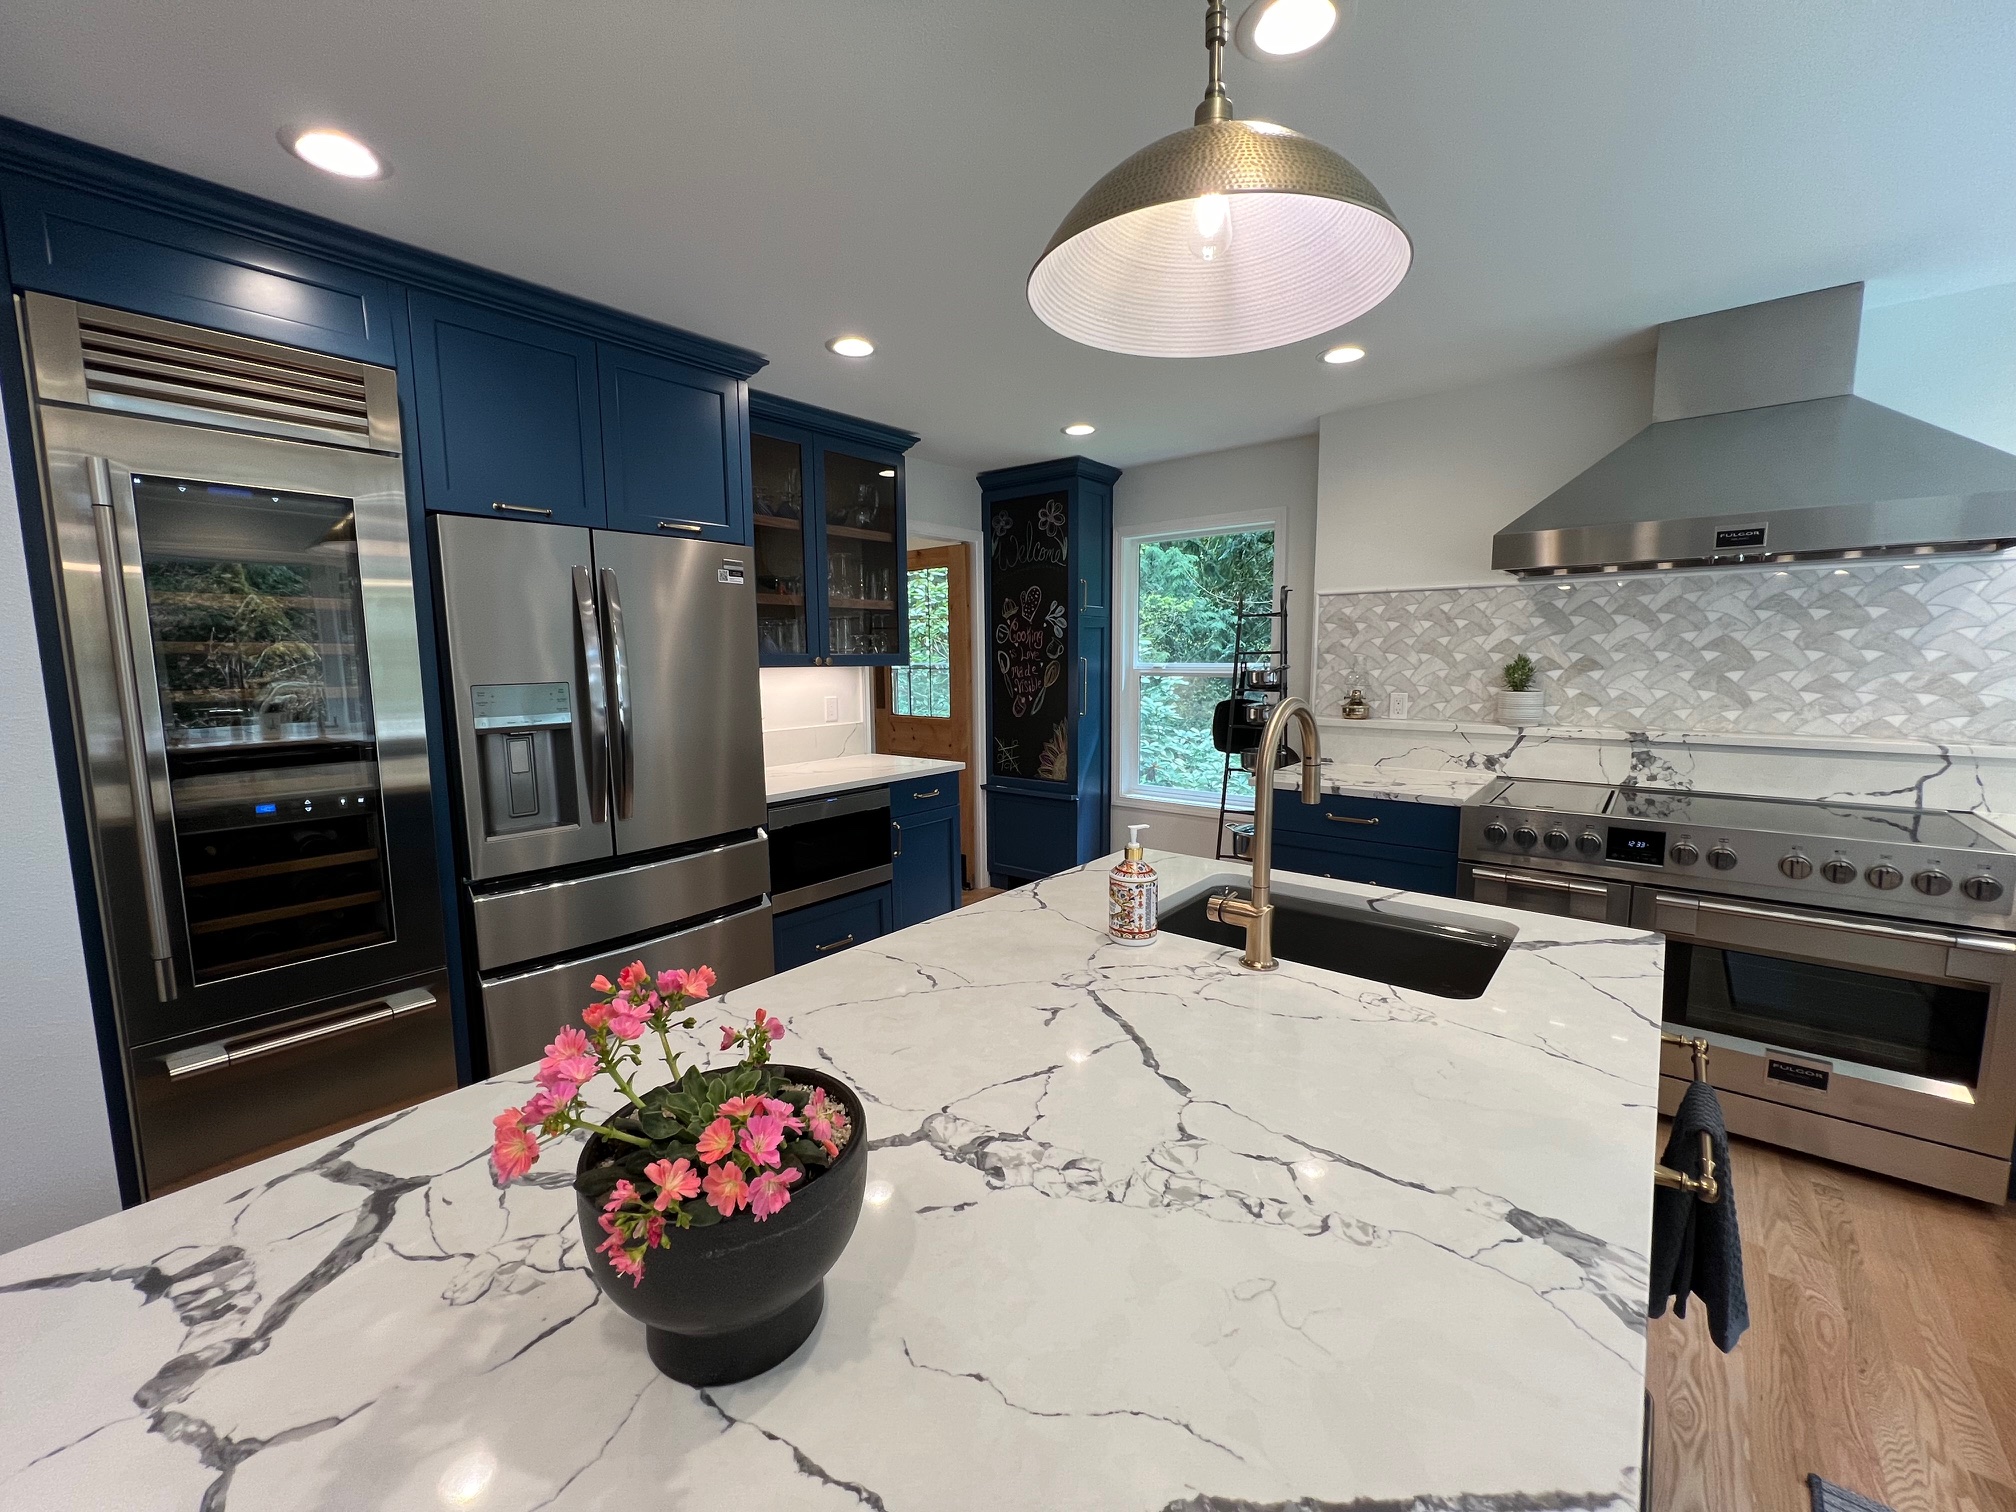 Featured image for “Woodinville Kitchen”